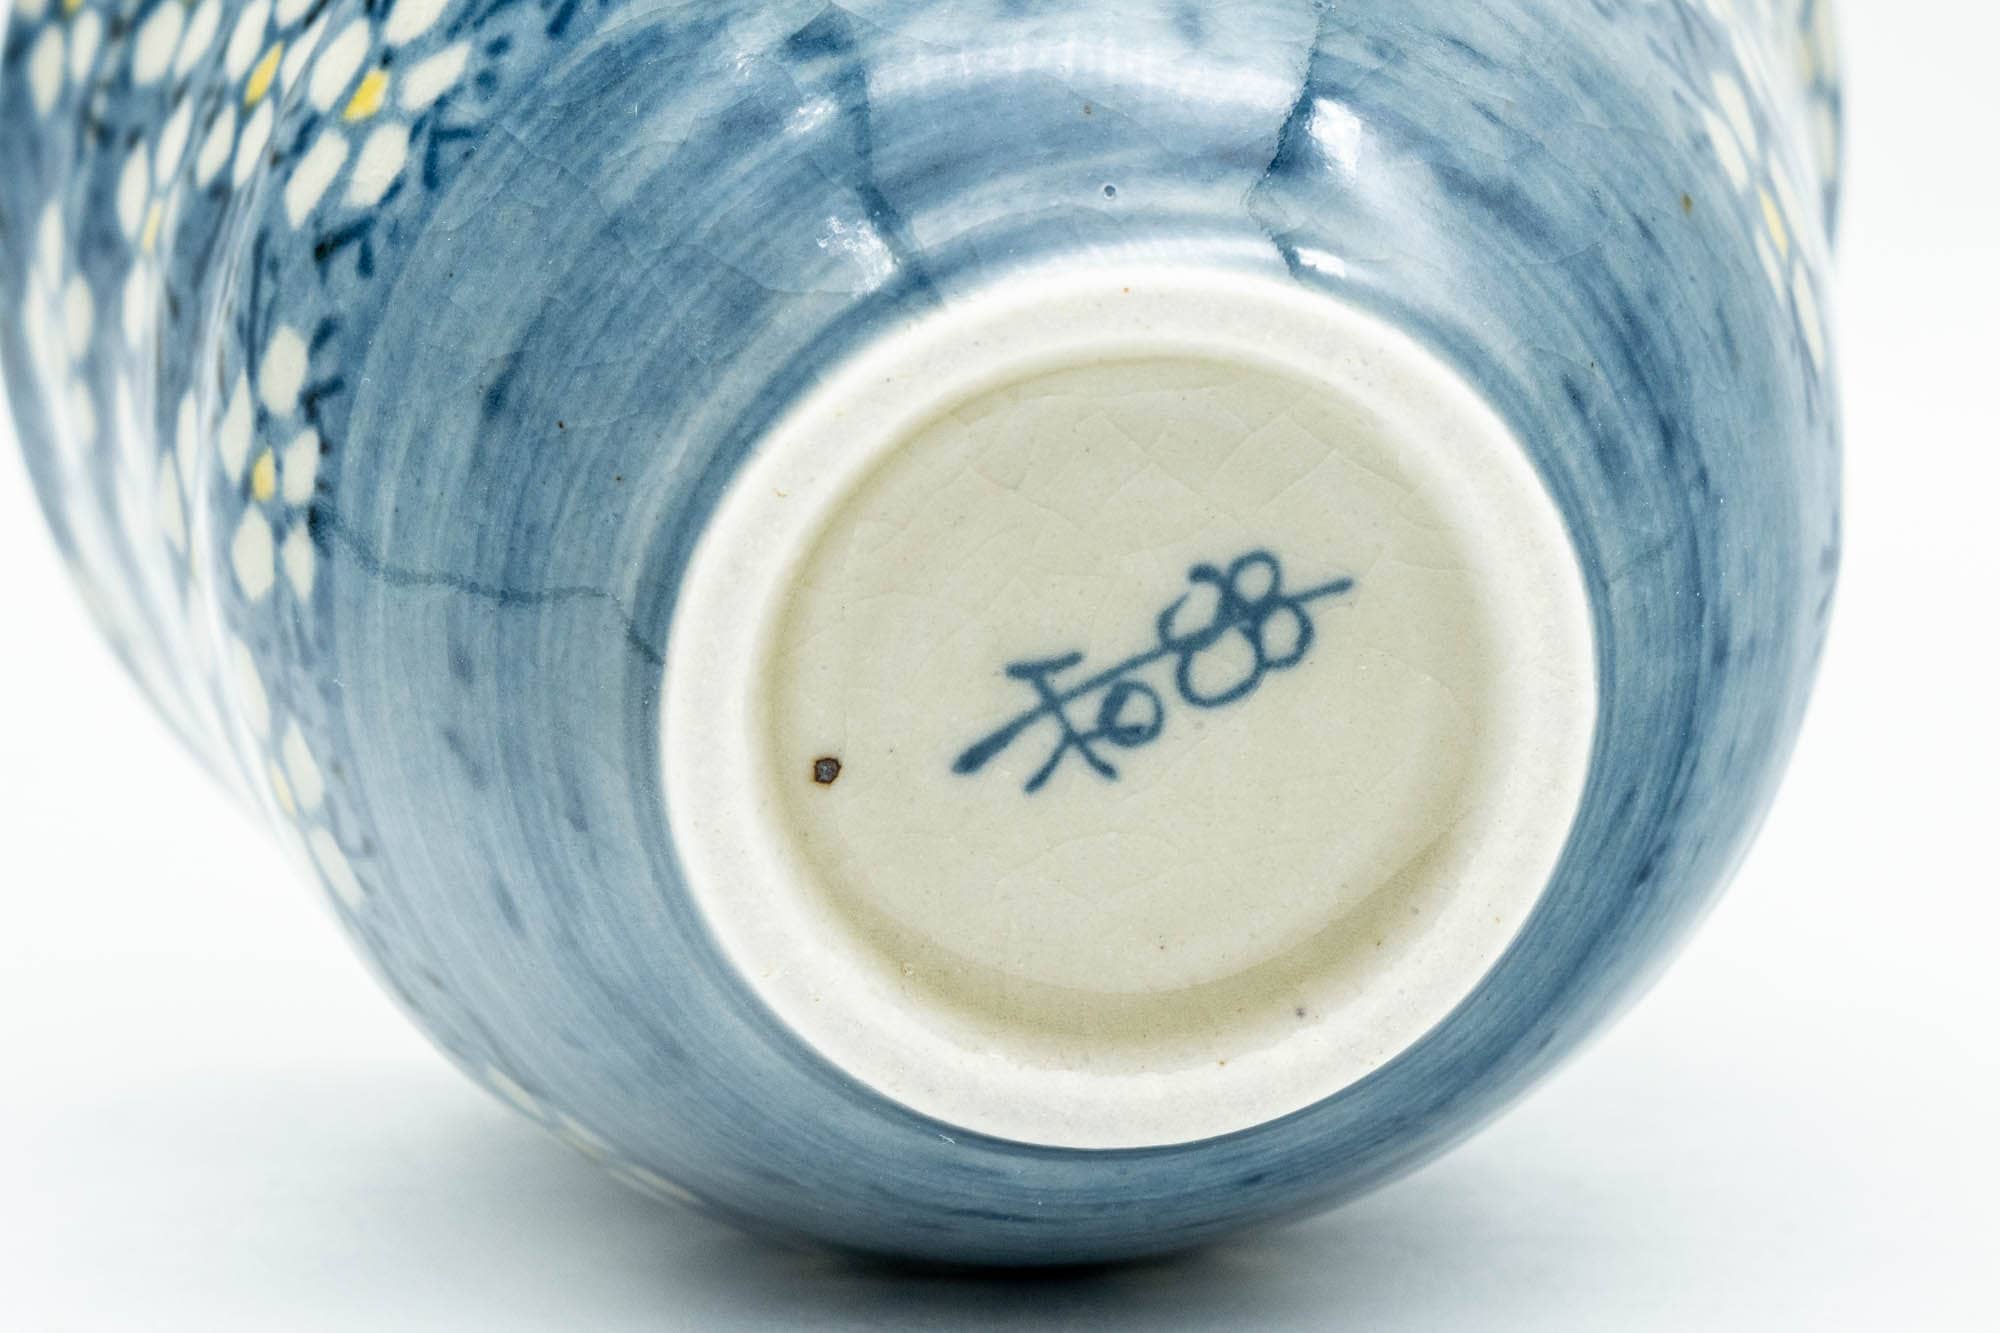 Japanese Teacup - Blue and White Floral Patterned Yunomi - 175ml - Tezumi